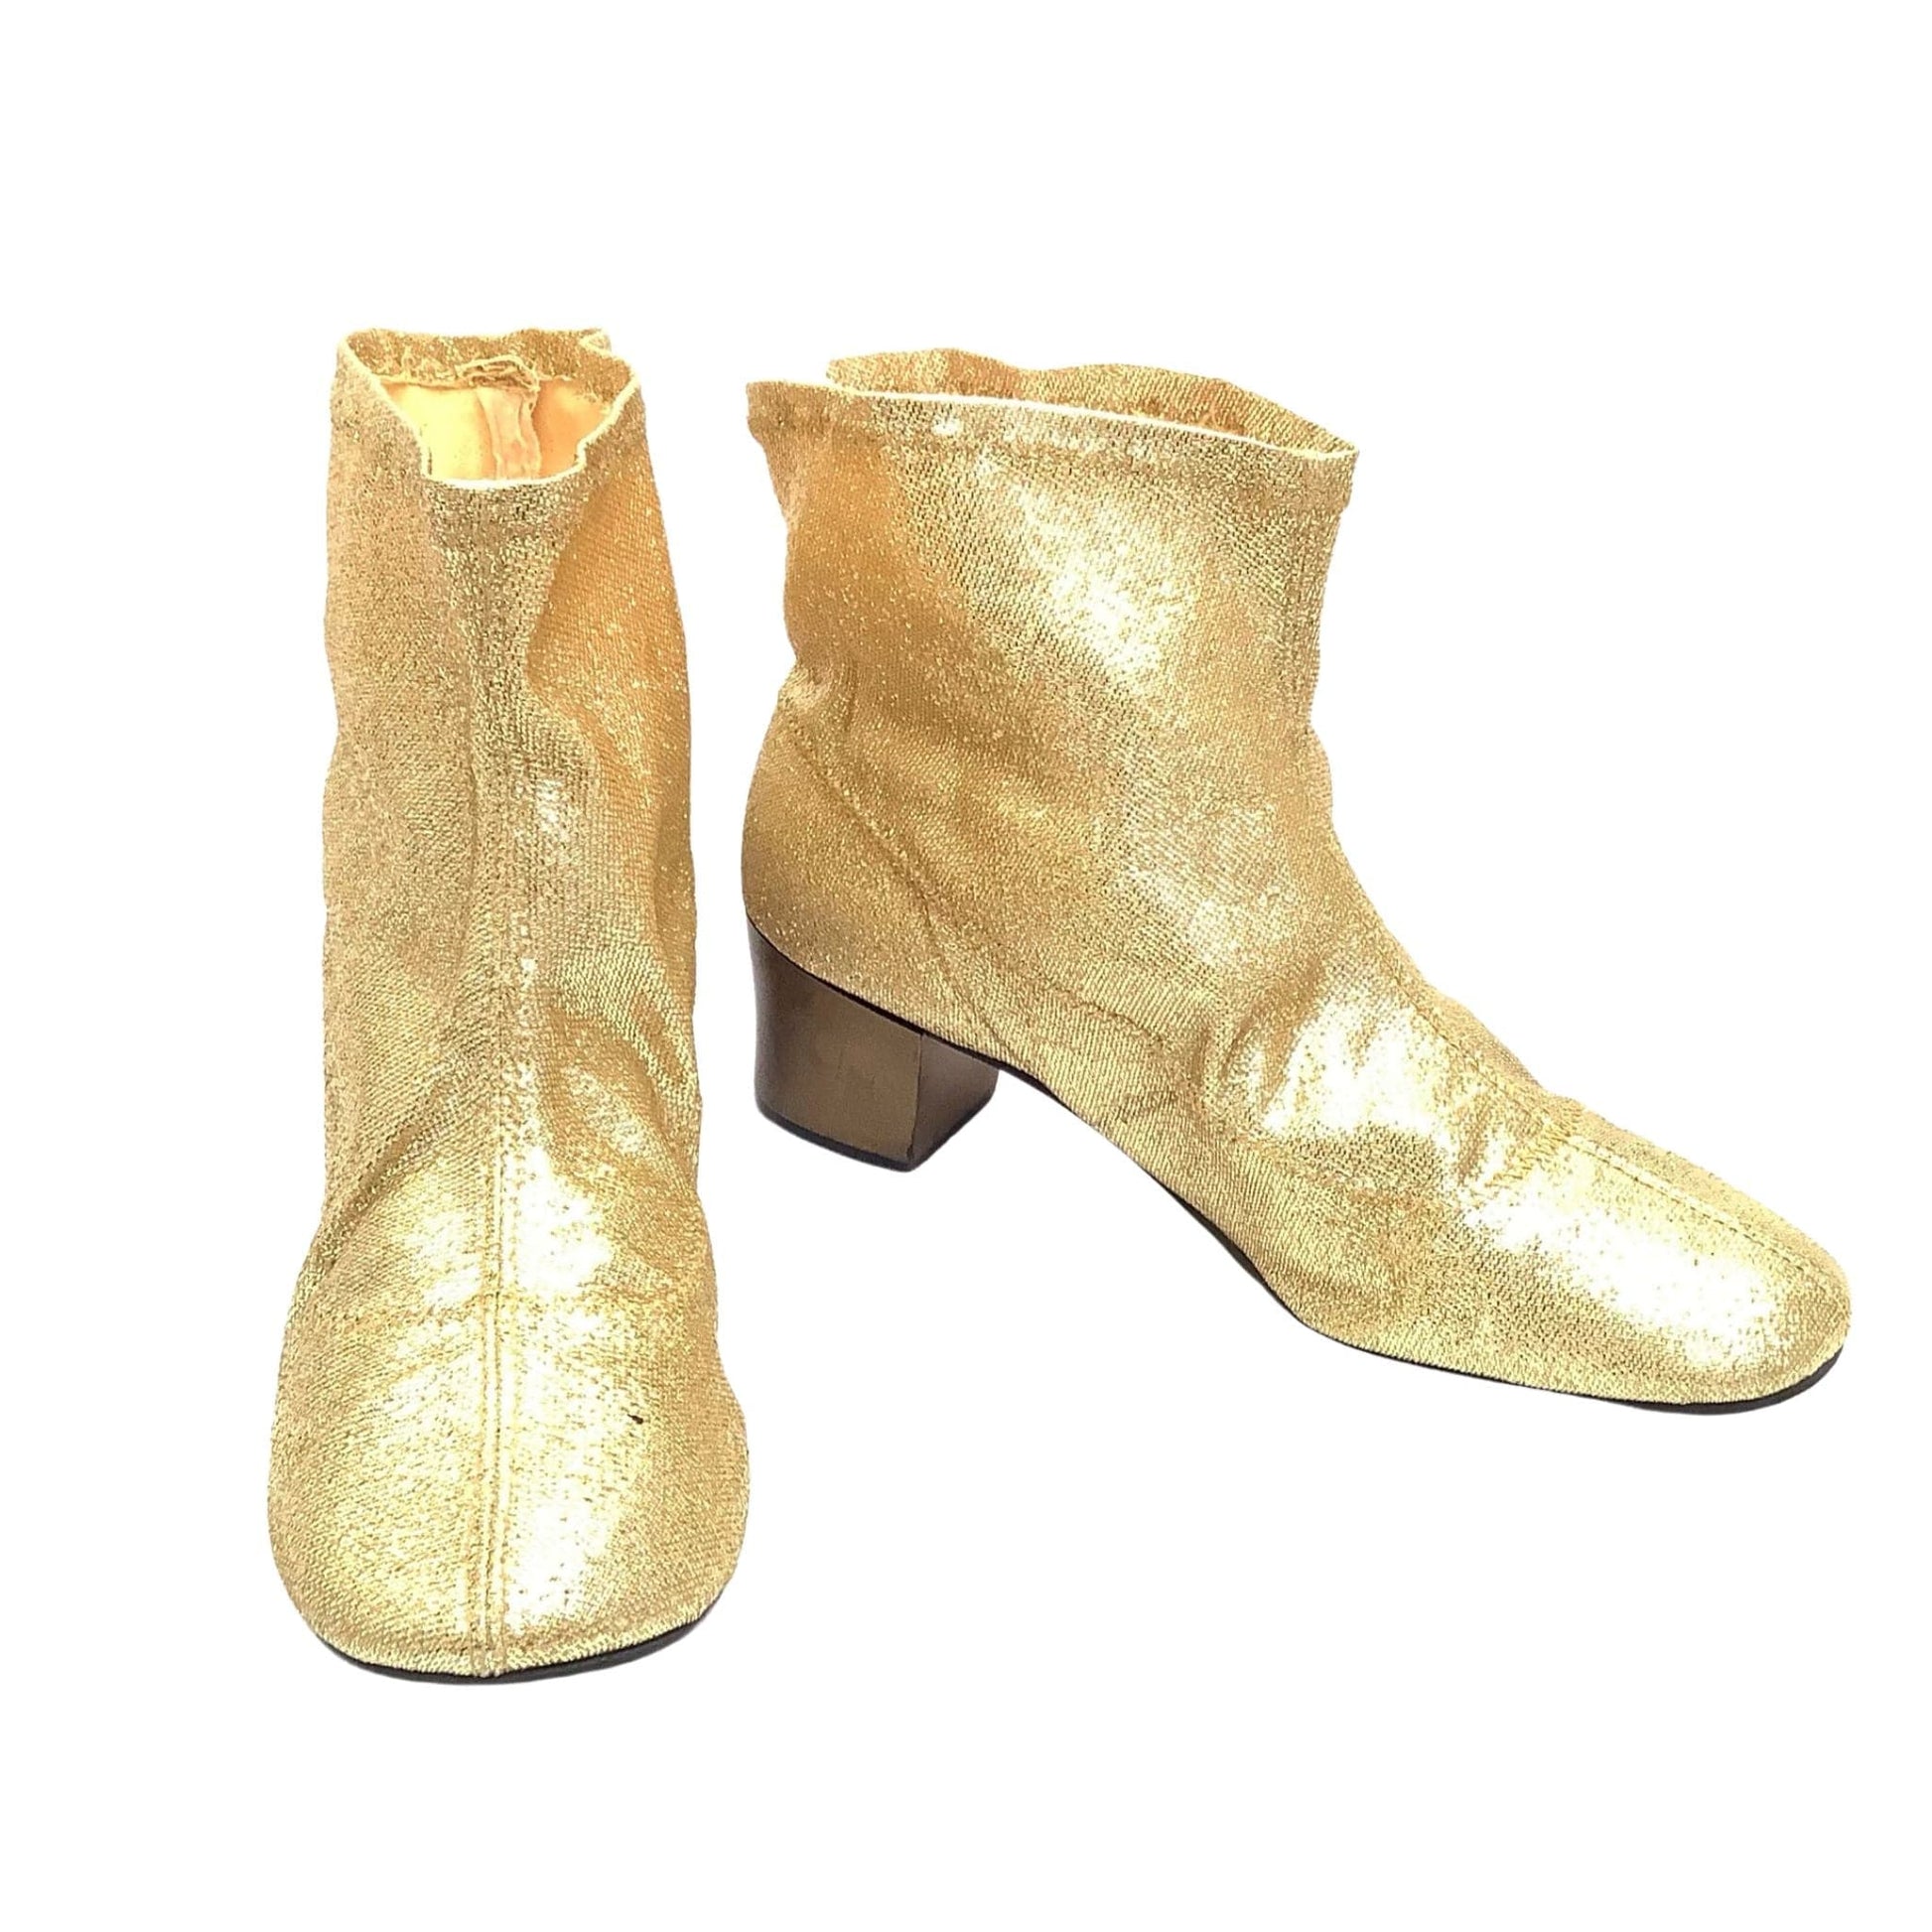 1960s GoGo Gold Booties 6.5 / Gold / Vintage 1960s